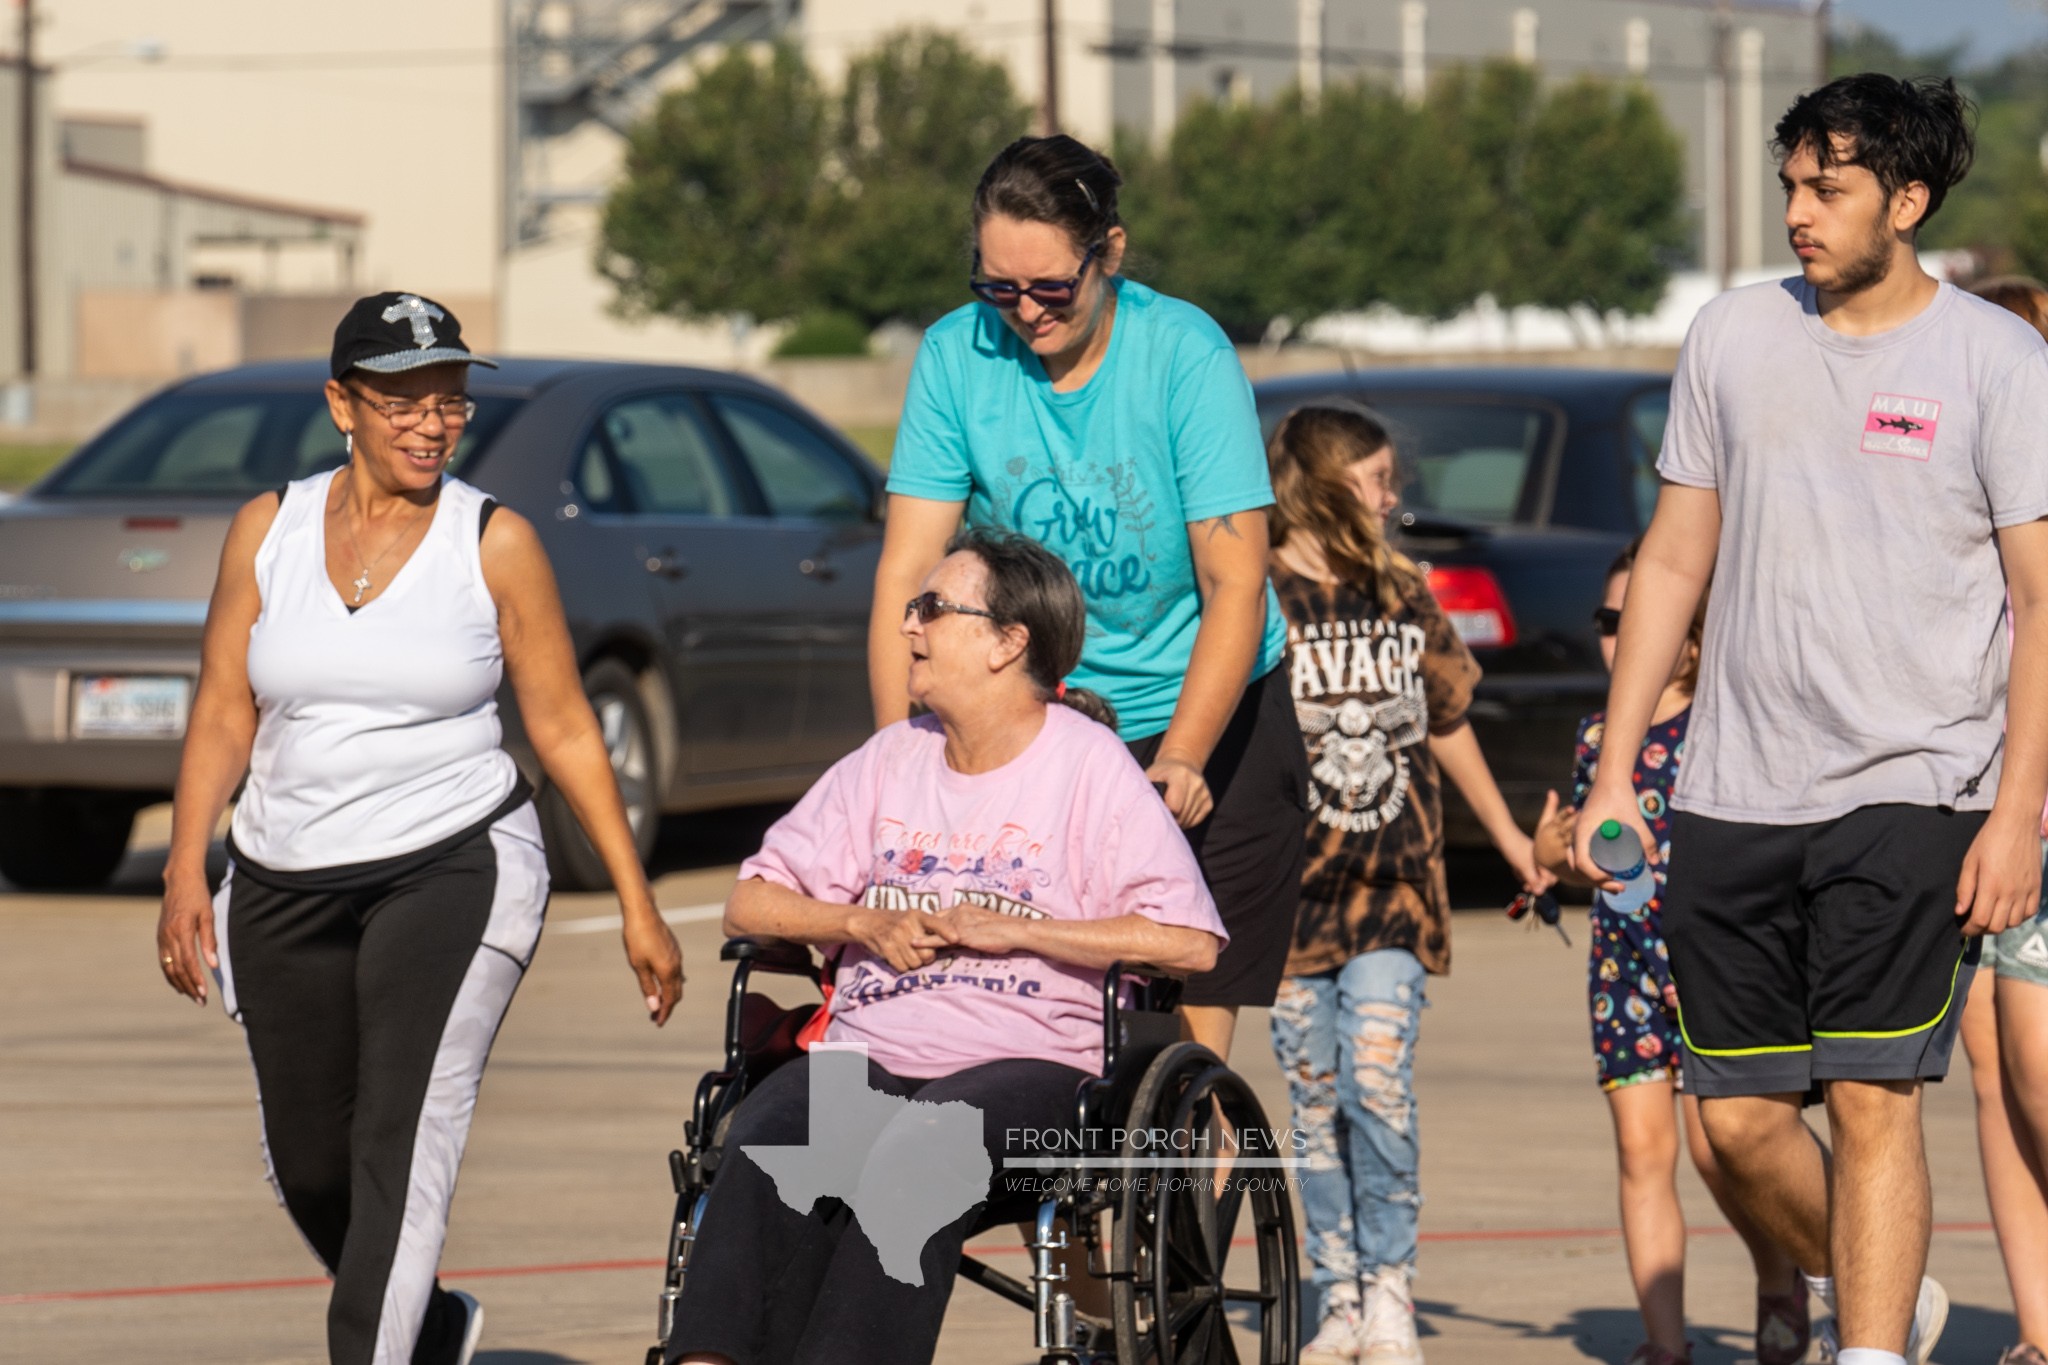 Walk like MADD 2022 Northeast Texas Mothers Against Drunk Driving